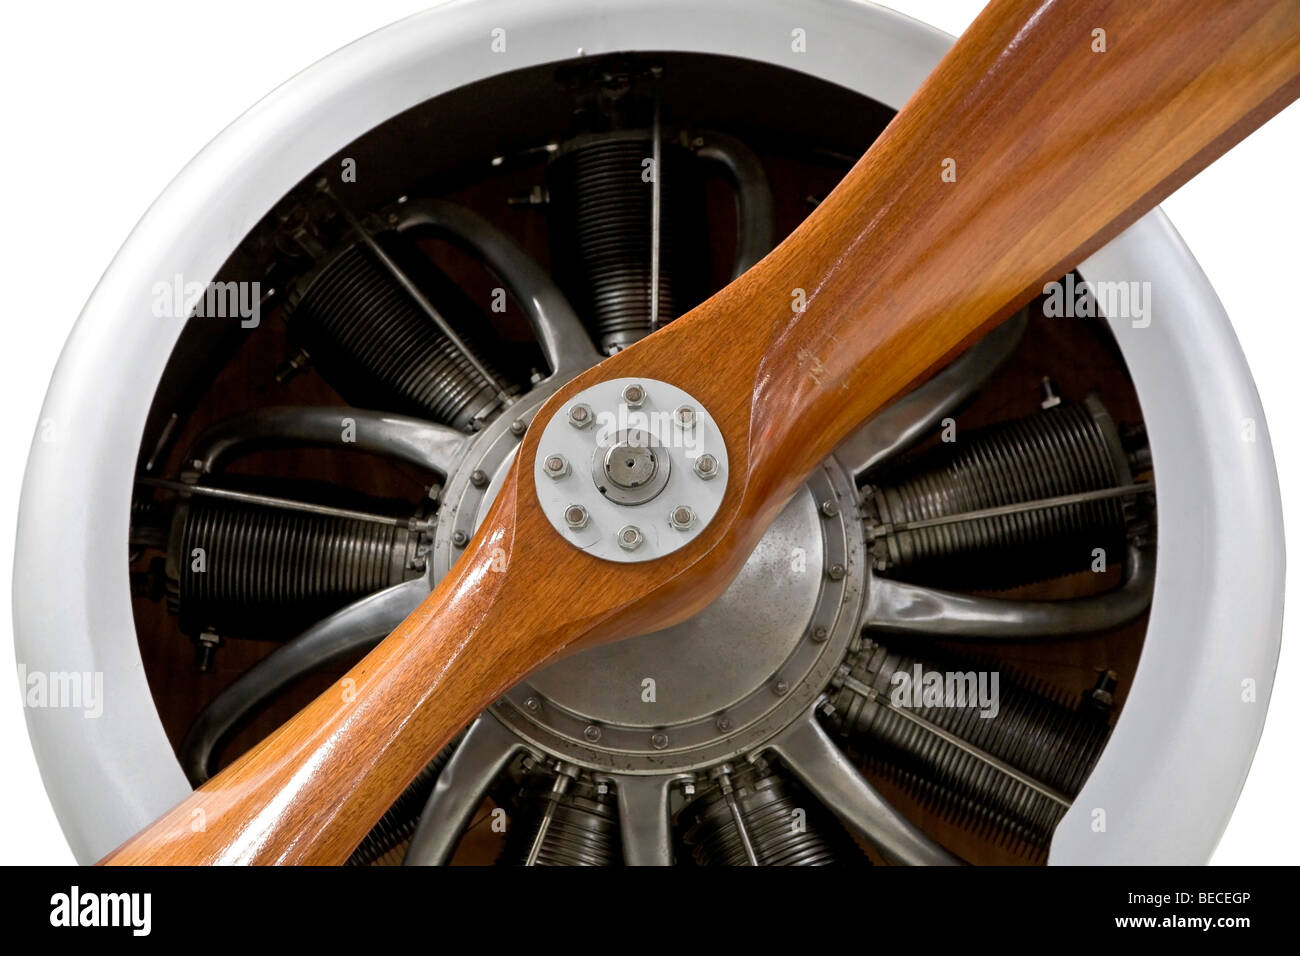 Aircraft engine with wooden propeller Stock Photo